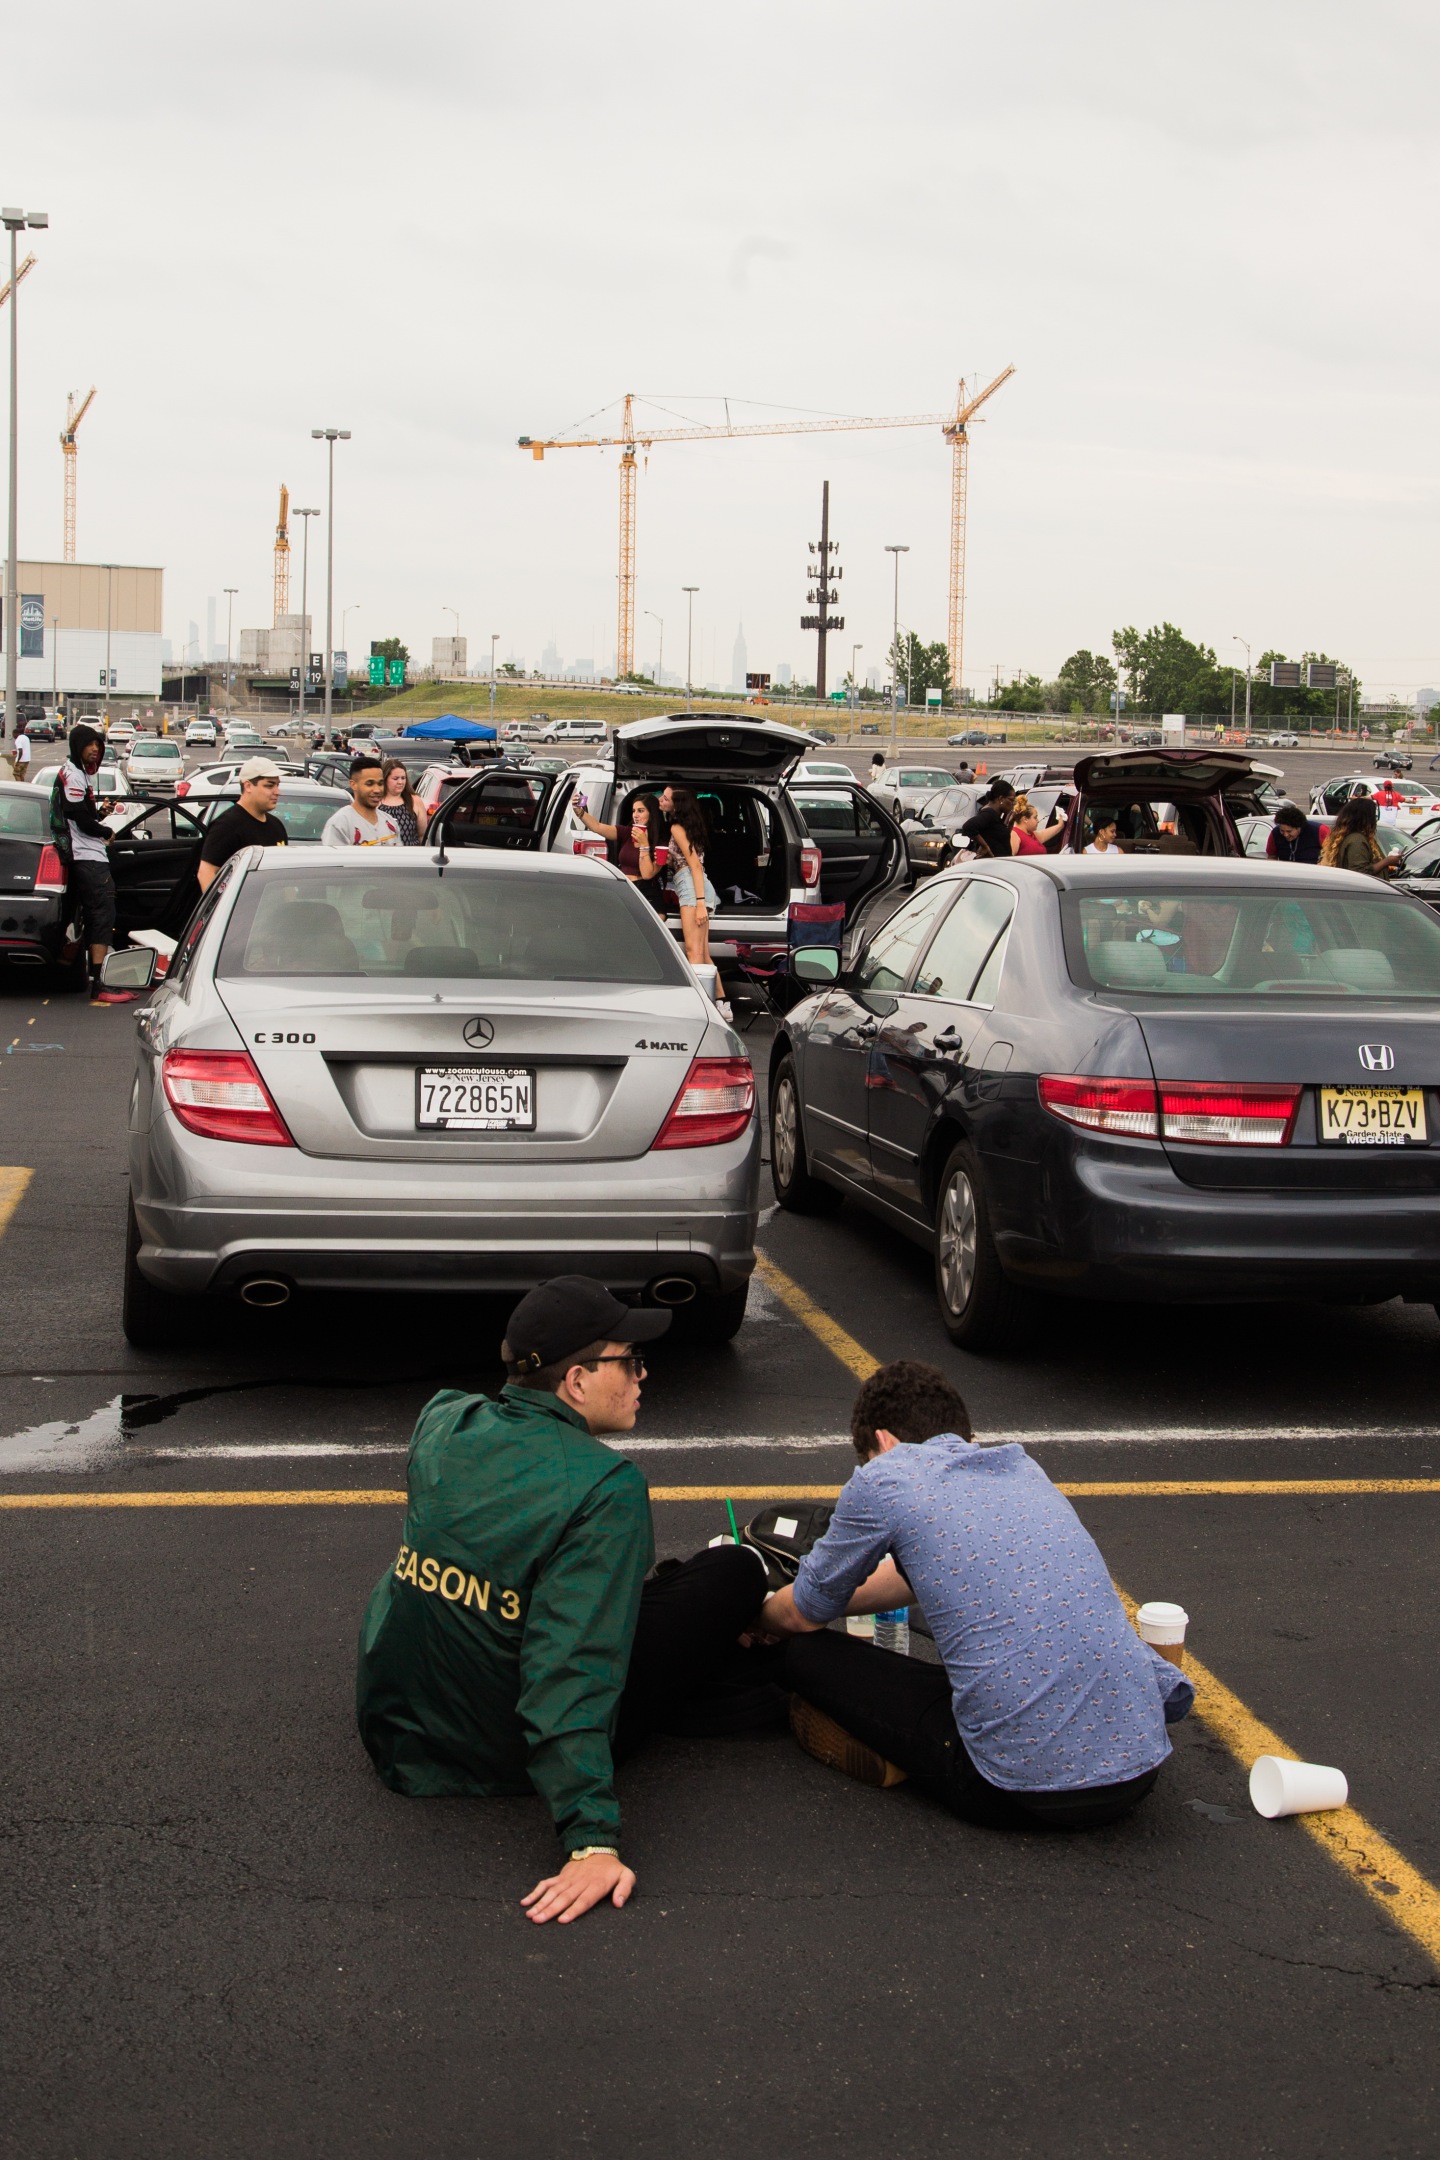 21 People Who Braved The Rain And Partied In The Summer Jam Parking Lot